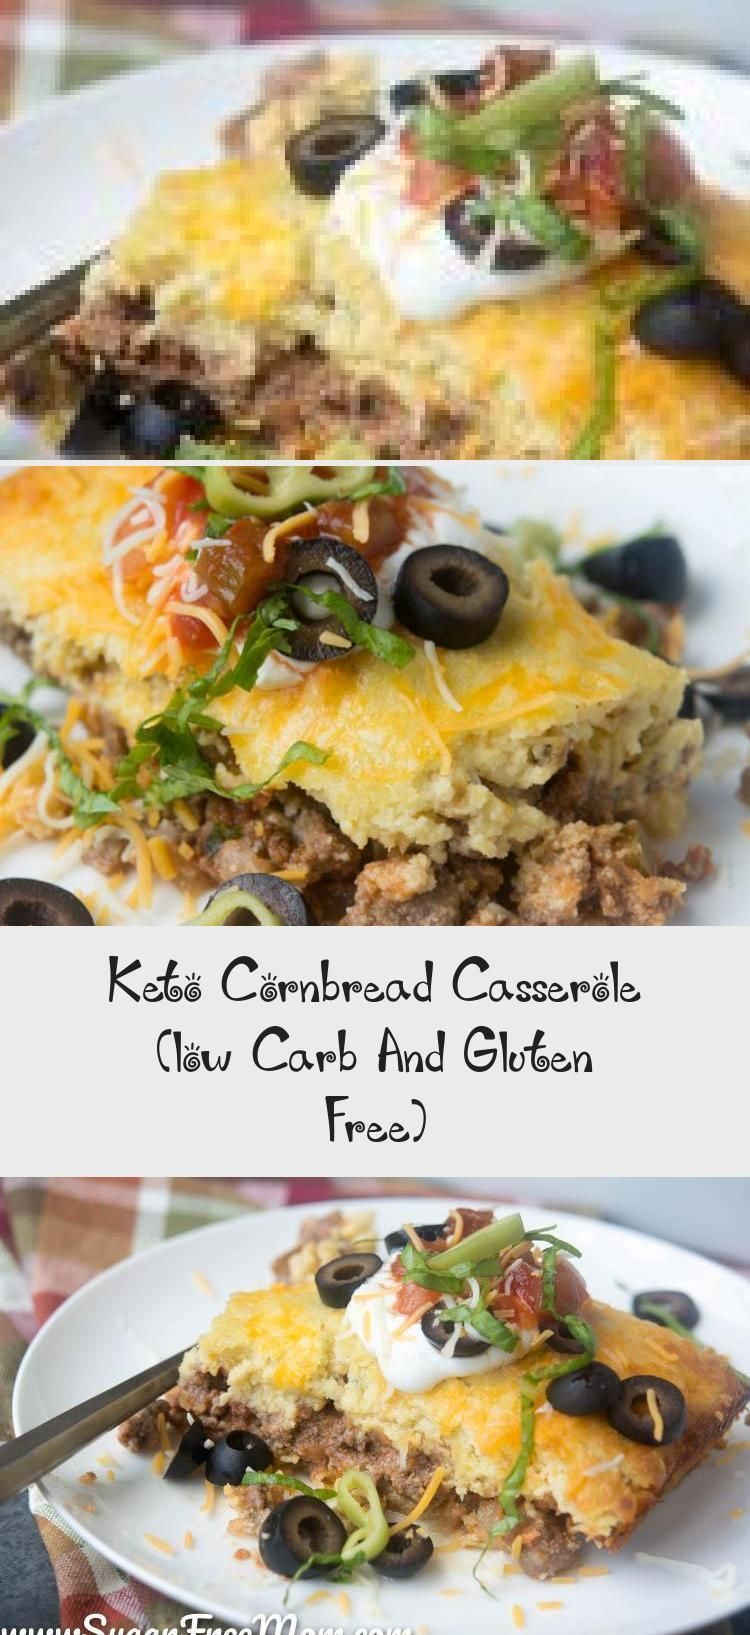 Keto Cornbread Casserole
 Keto Cornbread Casserole low Carb And Gluten Free